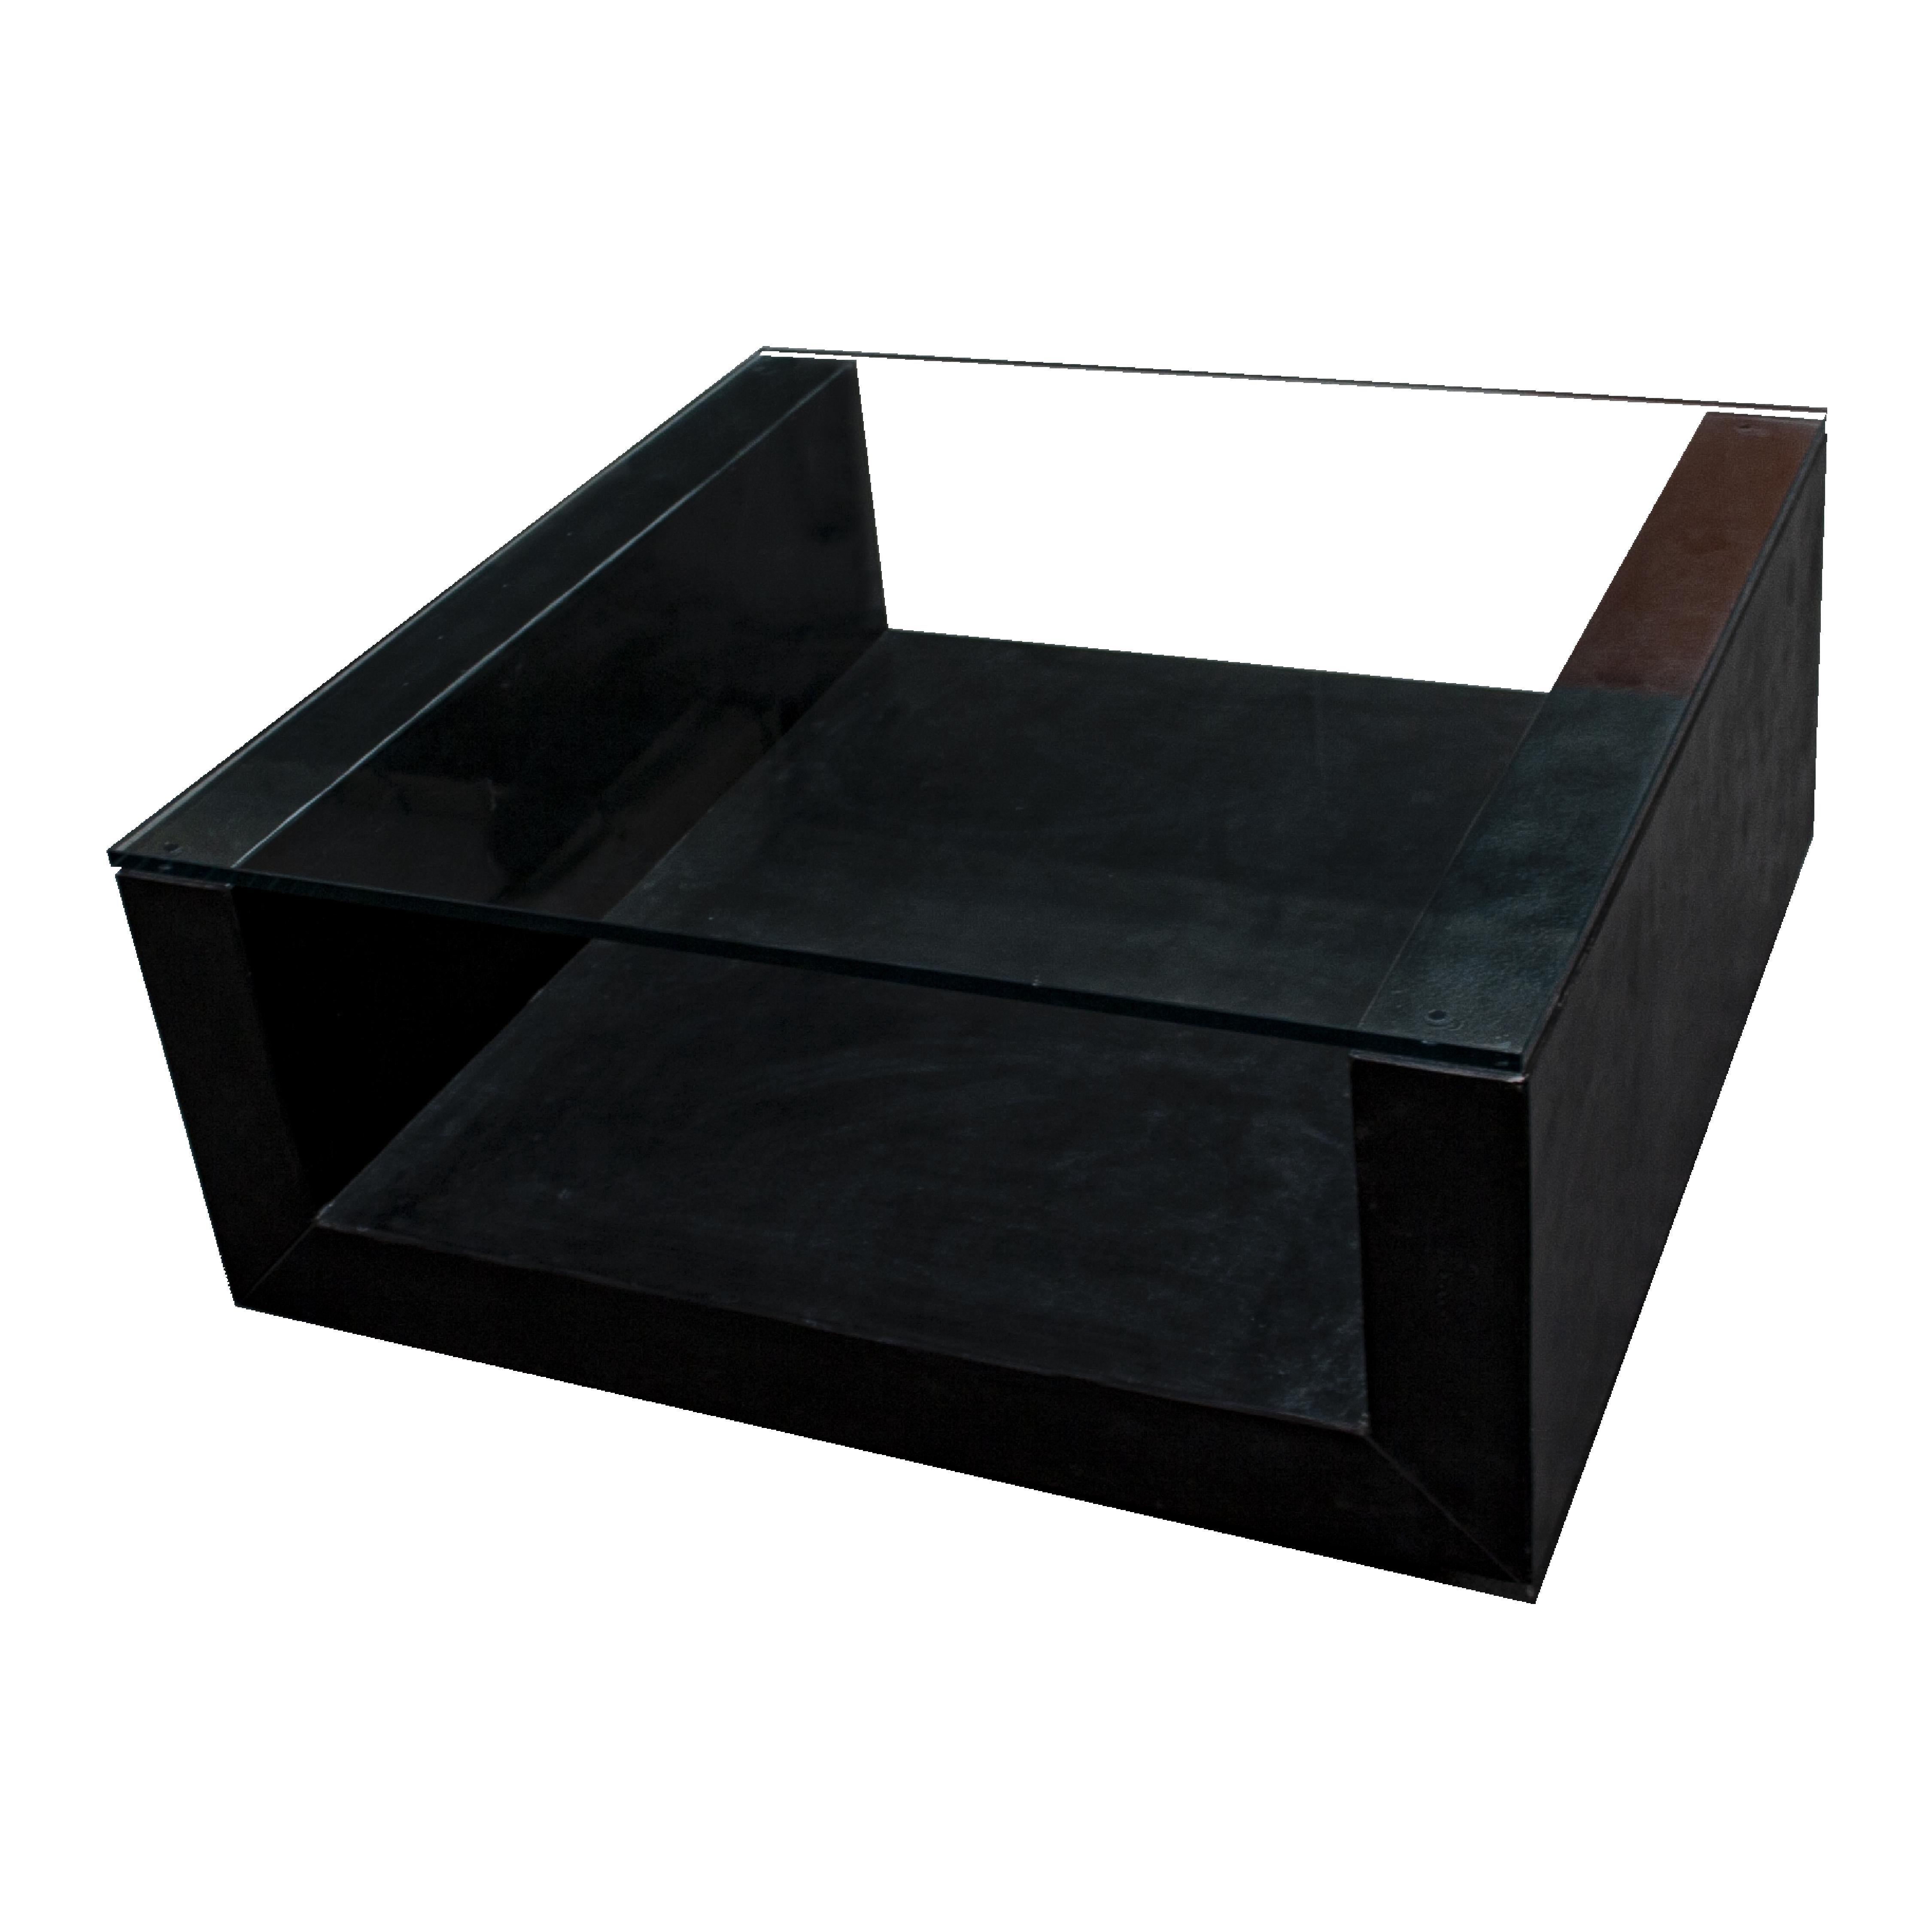 Hand-Crafted Amia Black Slate Coffee Table Natural Stone Contemporary Design in Stock Meddel For Sale